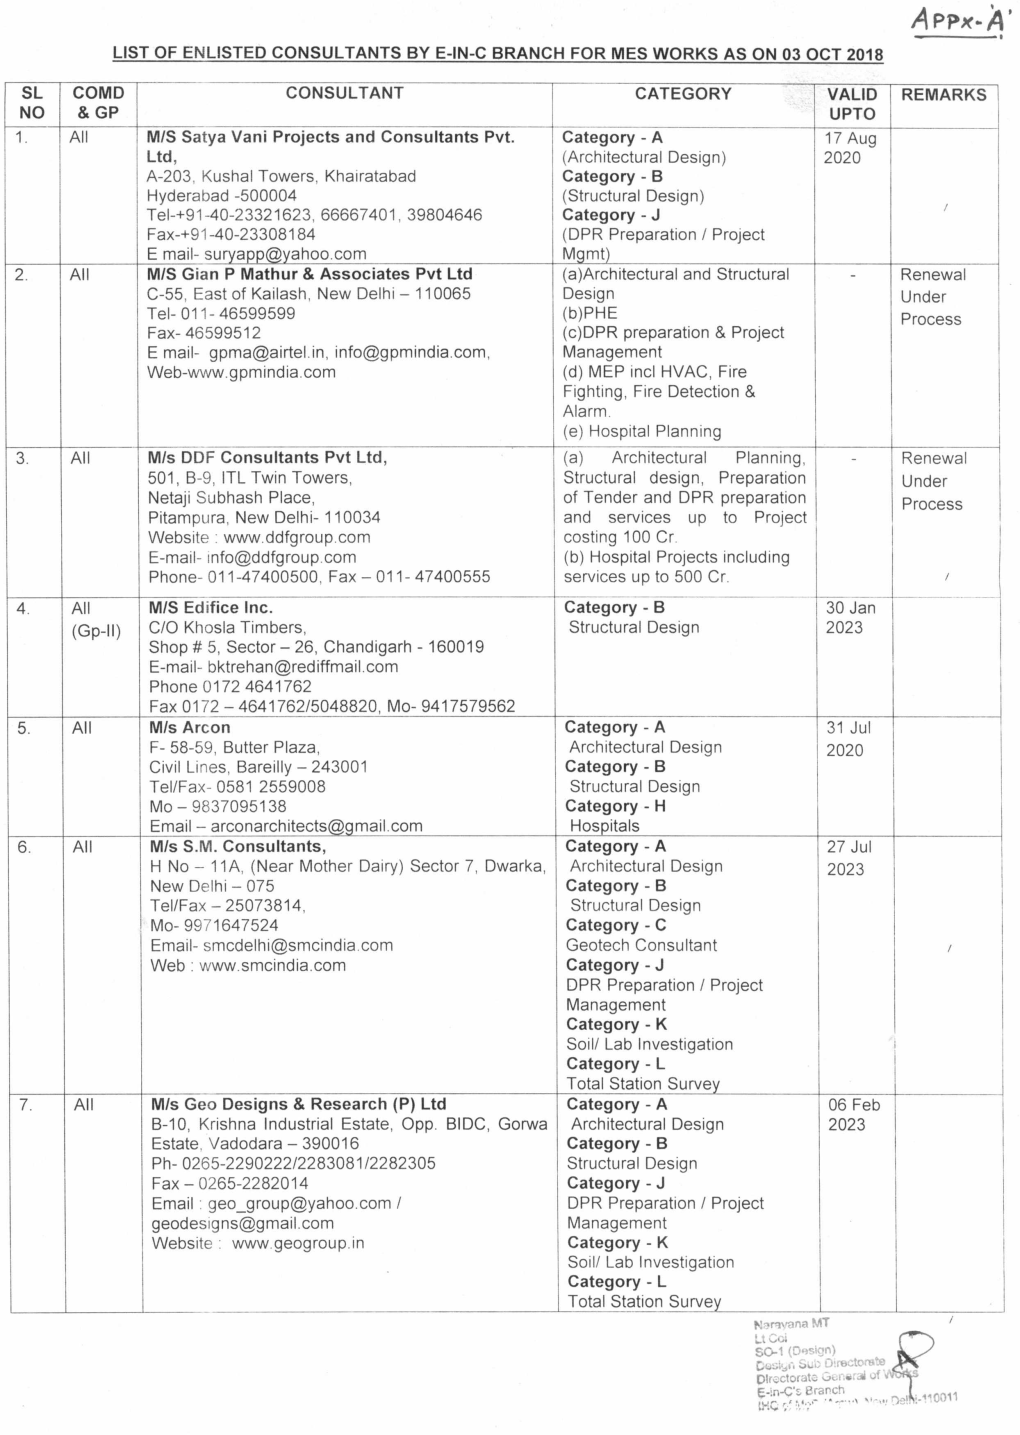 Appx-A' LIST of ENLISTED CONSULTANTS by E-IN-C BRANCH for MES WORKS AS on 03 OCT 2018